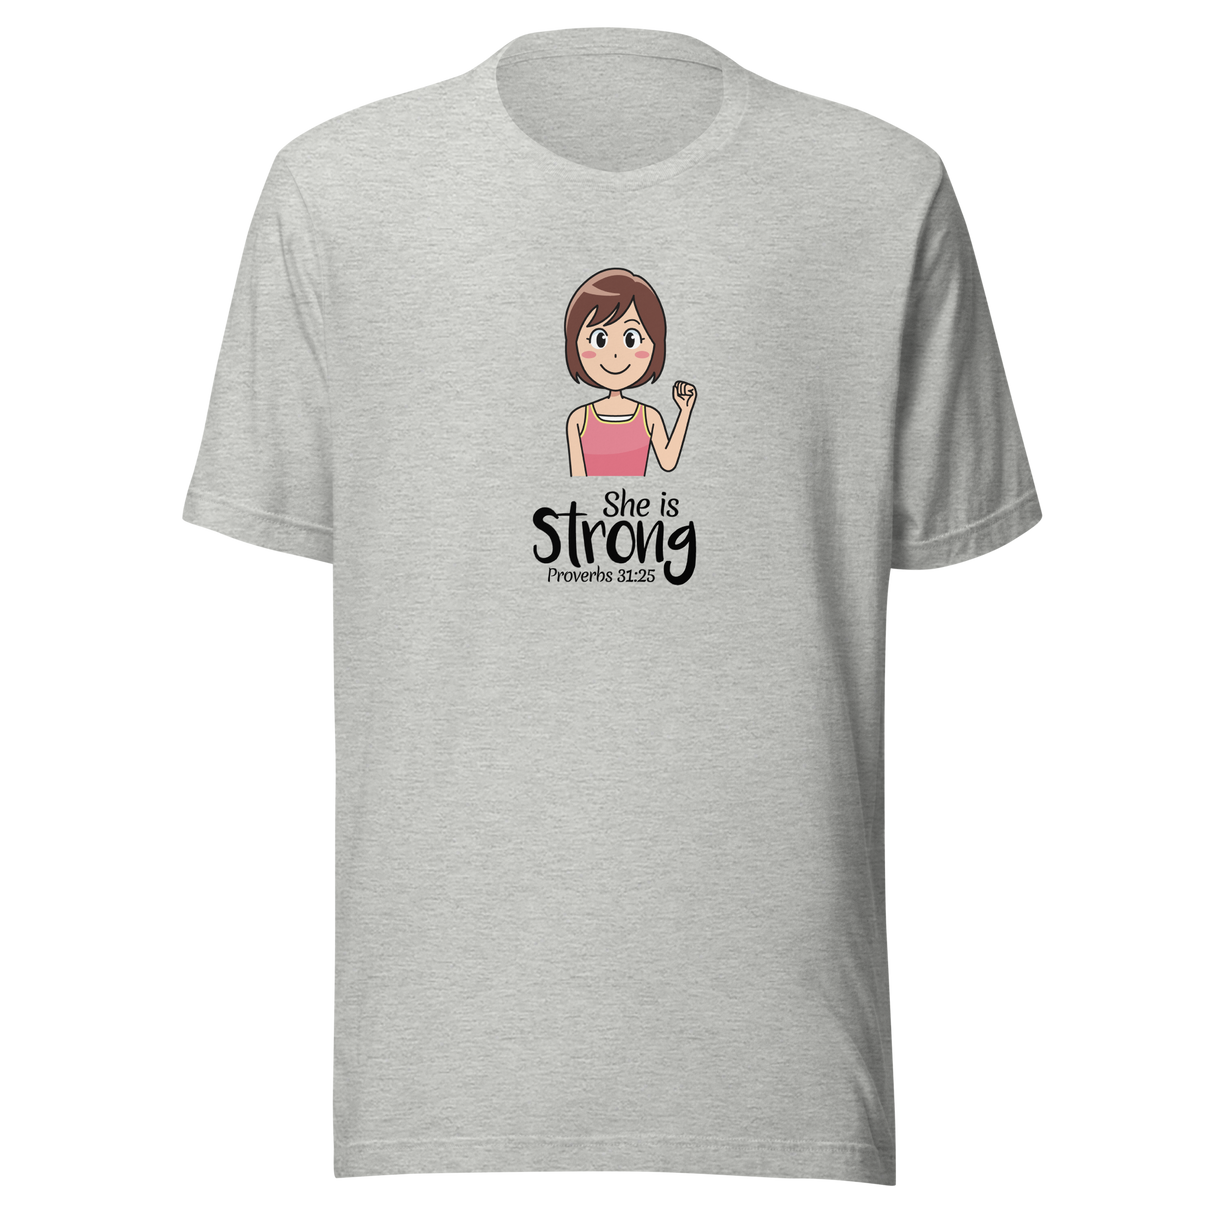 she-is-strong-proverbs-31-25-christian-tee-womens-t-shirt-proverbs-tee-faith-t-shirt-religion-tee#color_athletic-heather